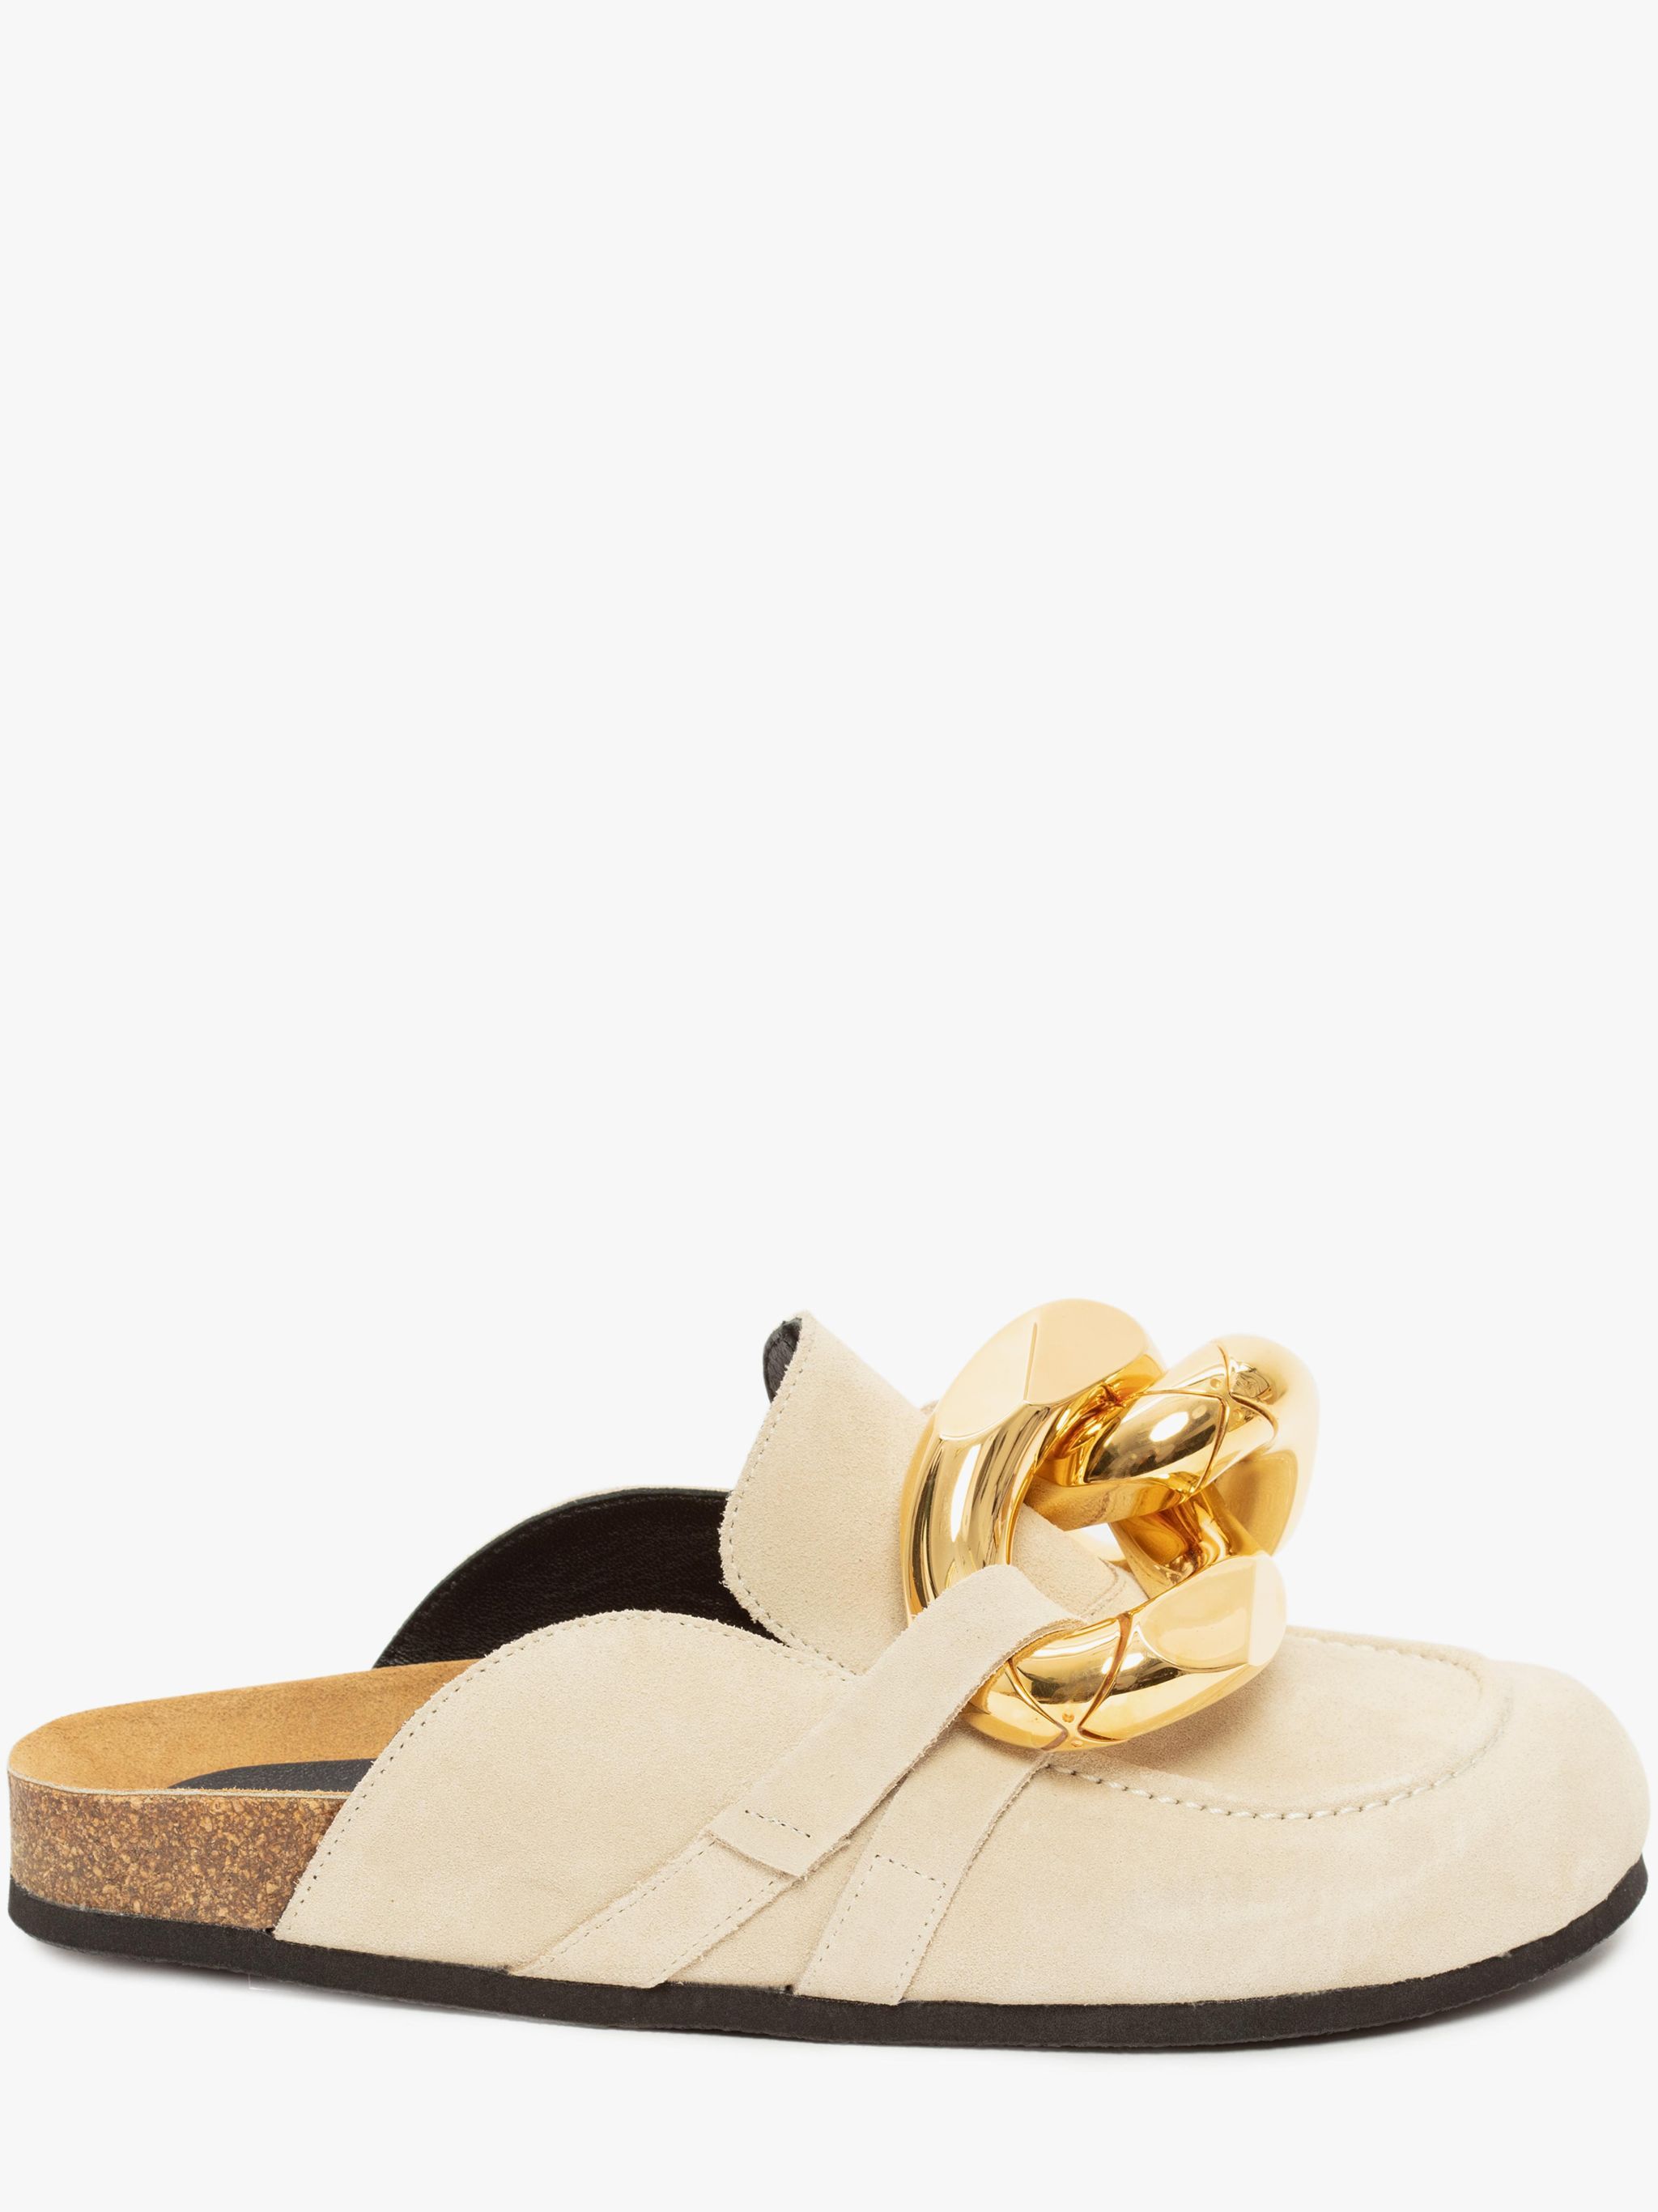 WOMEN’S SUEDE LOAFER MULES | JW Anderson